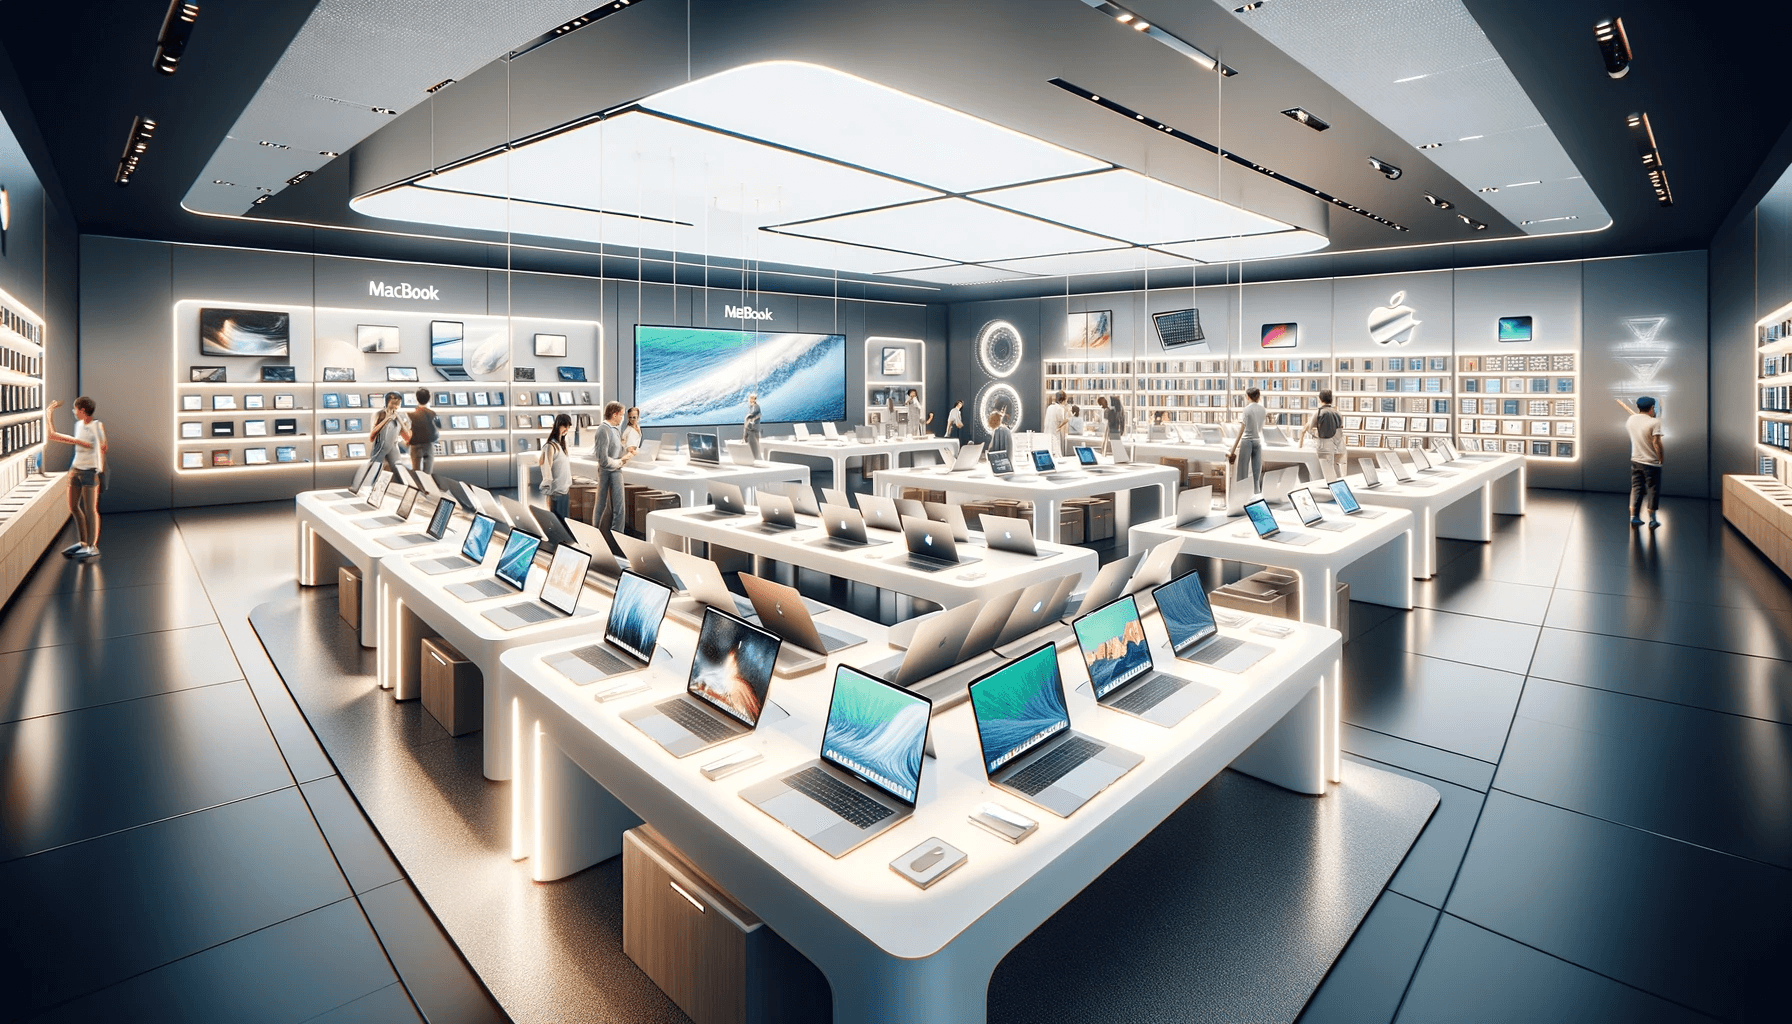 DALL·E 2023 12 21 17.05.24 A digital illustration of a shop with a lot of MacBooks. The shop is designed in a modern and stylish manner showcasing various models of MacBooks on